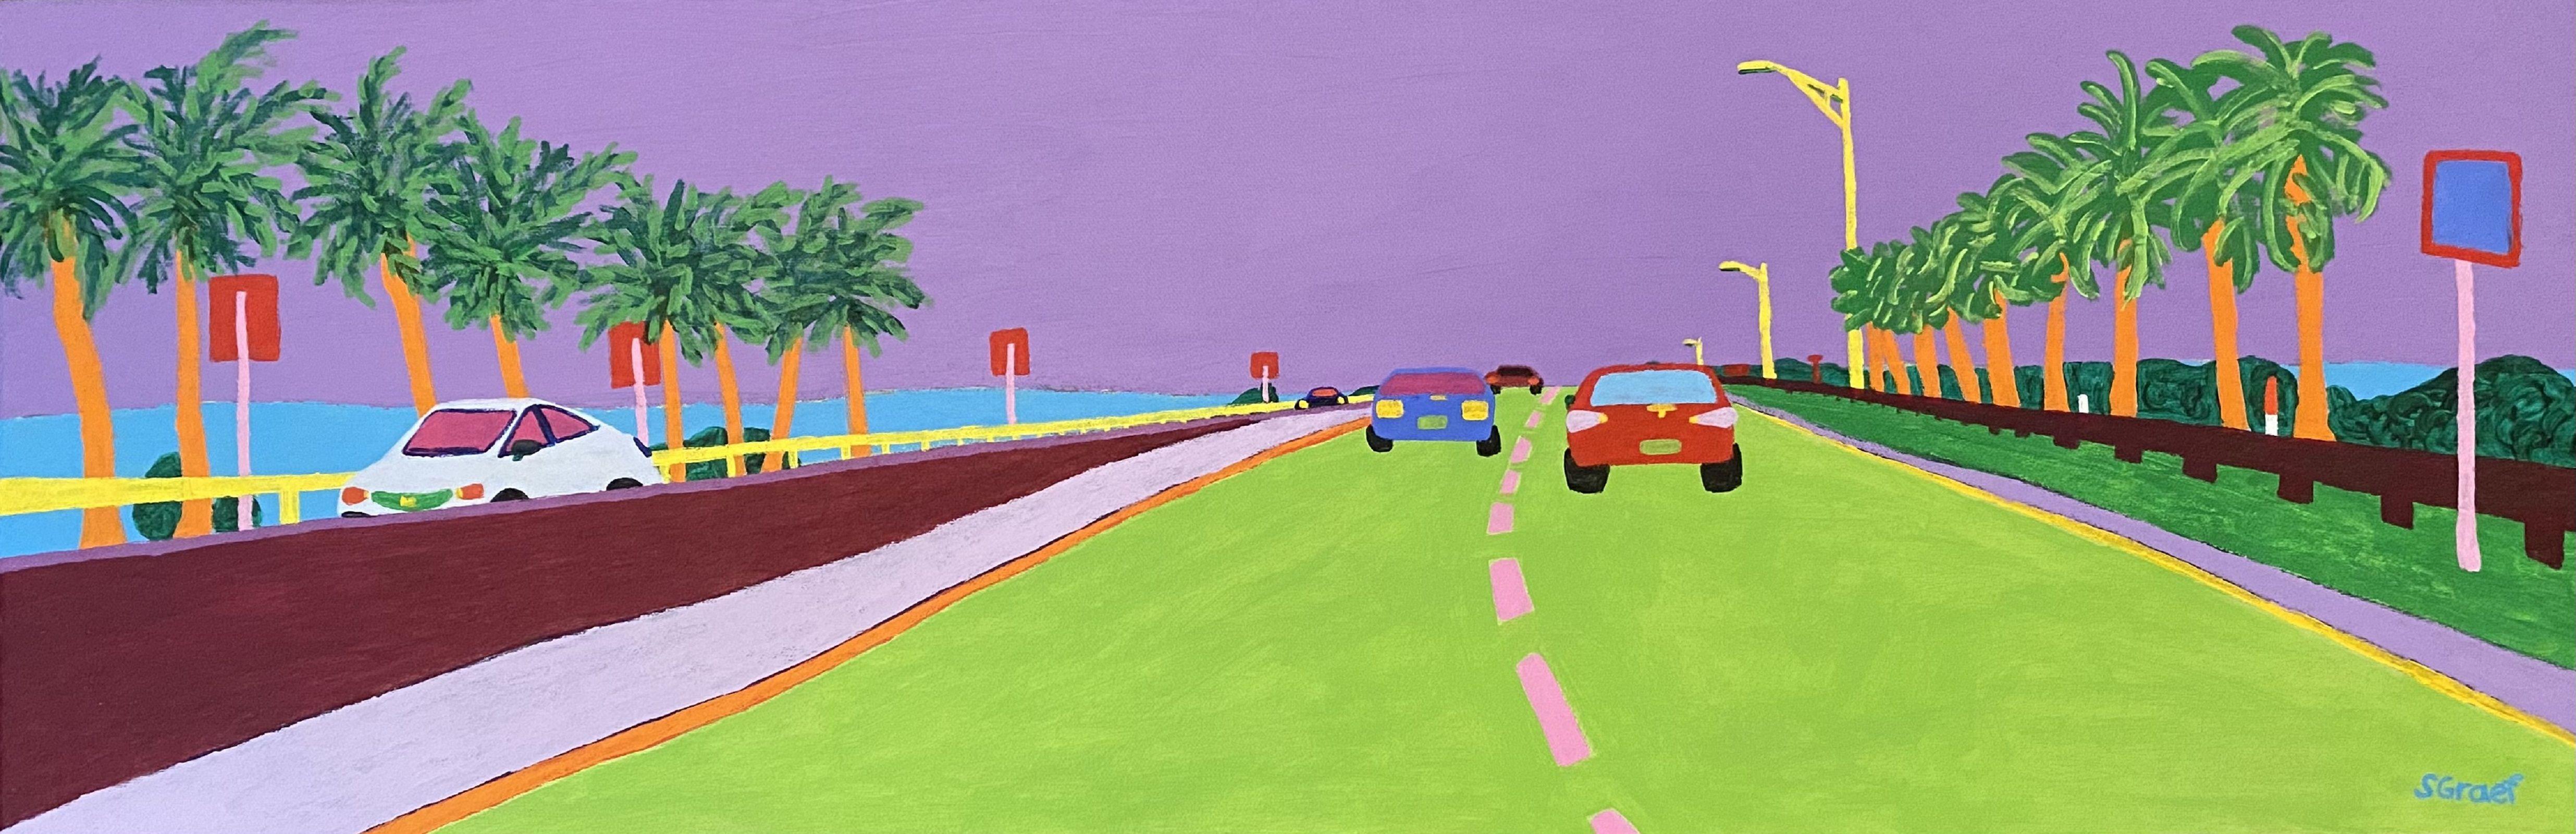 A familiar landscape scene viewed frequently in my travels back and forth on the causeway between Clearwater and Tampa, Florida. Painted playfully in bold colors of green, violet, magenta and more green.  The artwork is unframed with painted edges